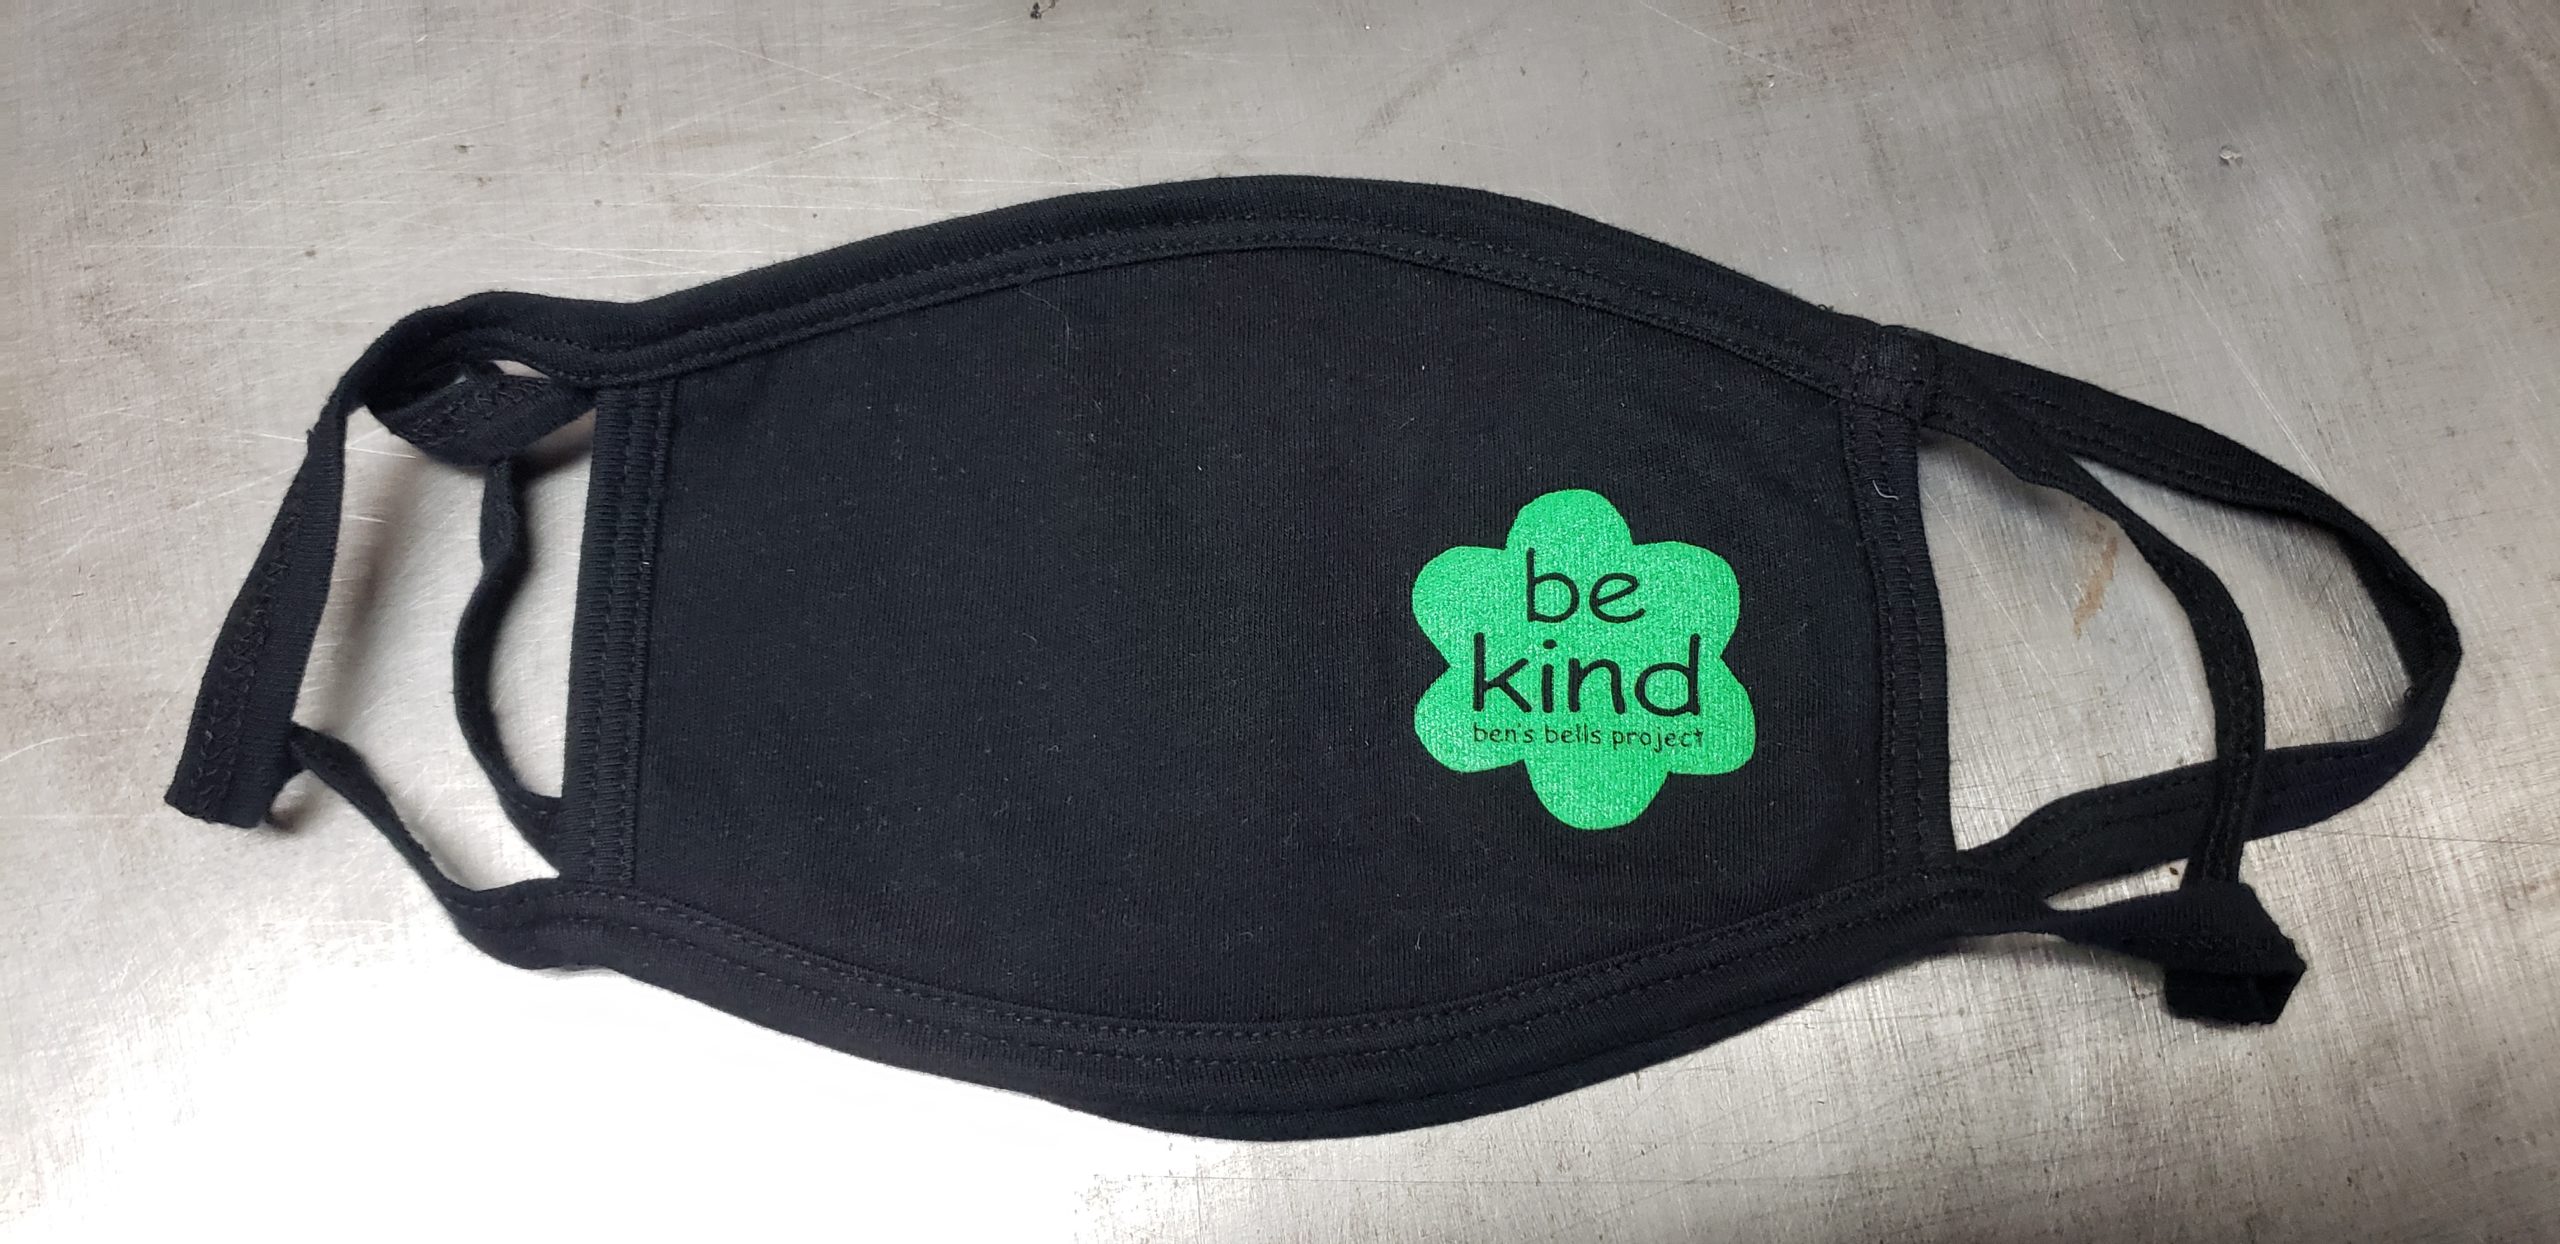 Black cotton face mask with union screen printed one color design for the ben's bells project that reads, "be kind" in a simple flower shape